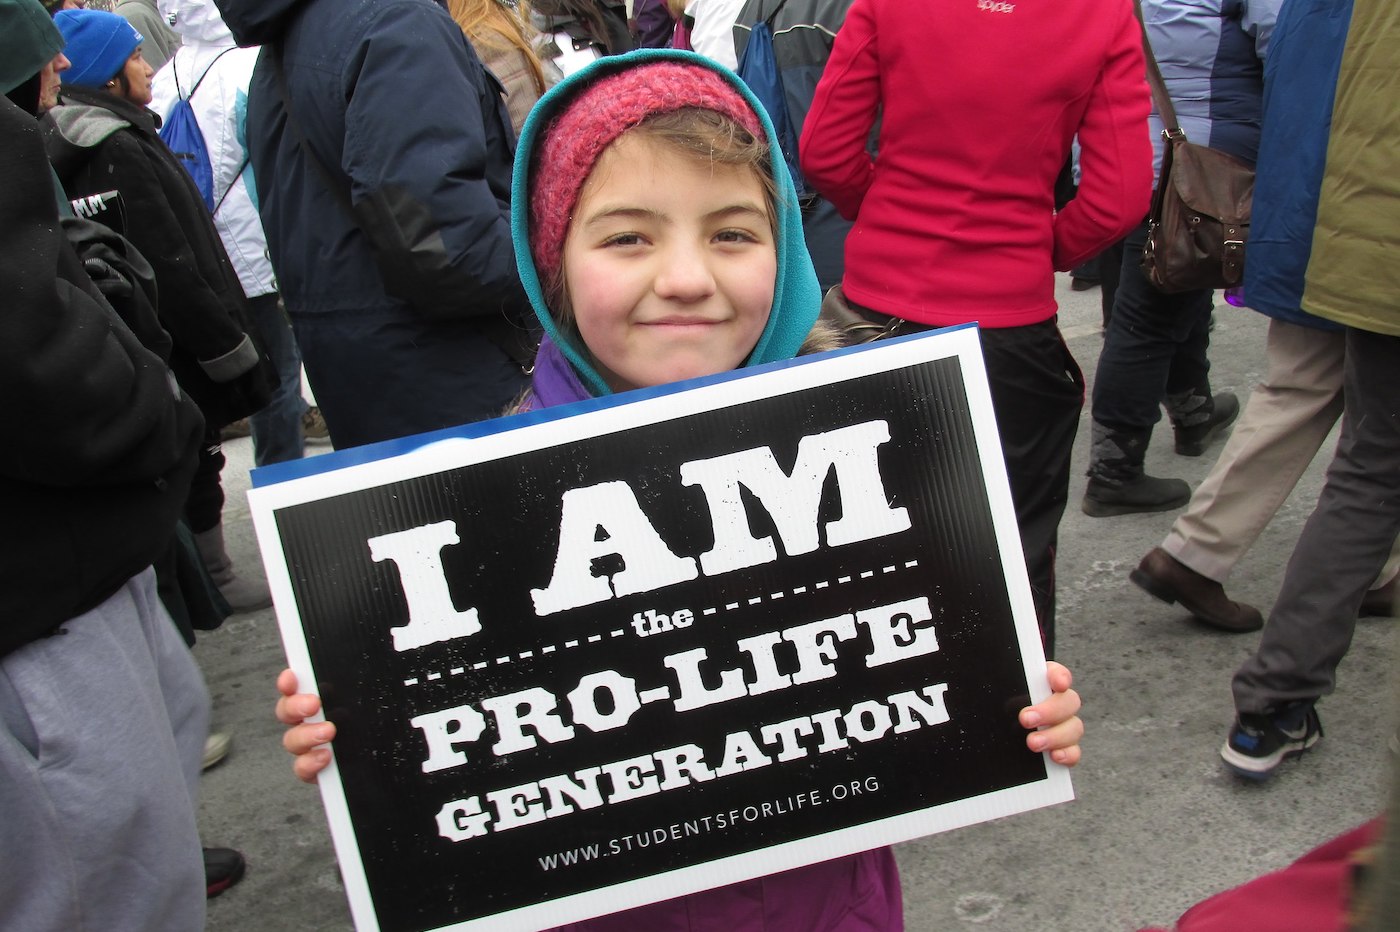 Photo from the march for life